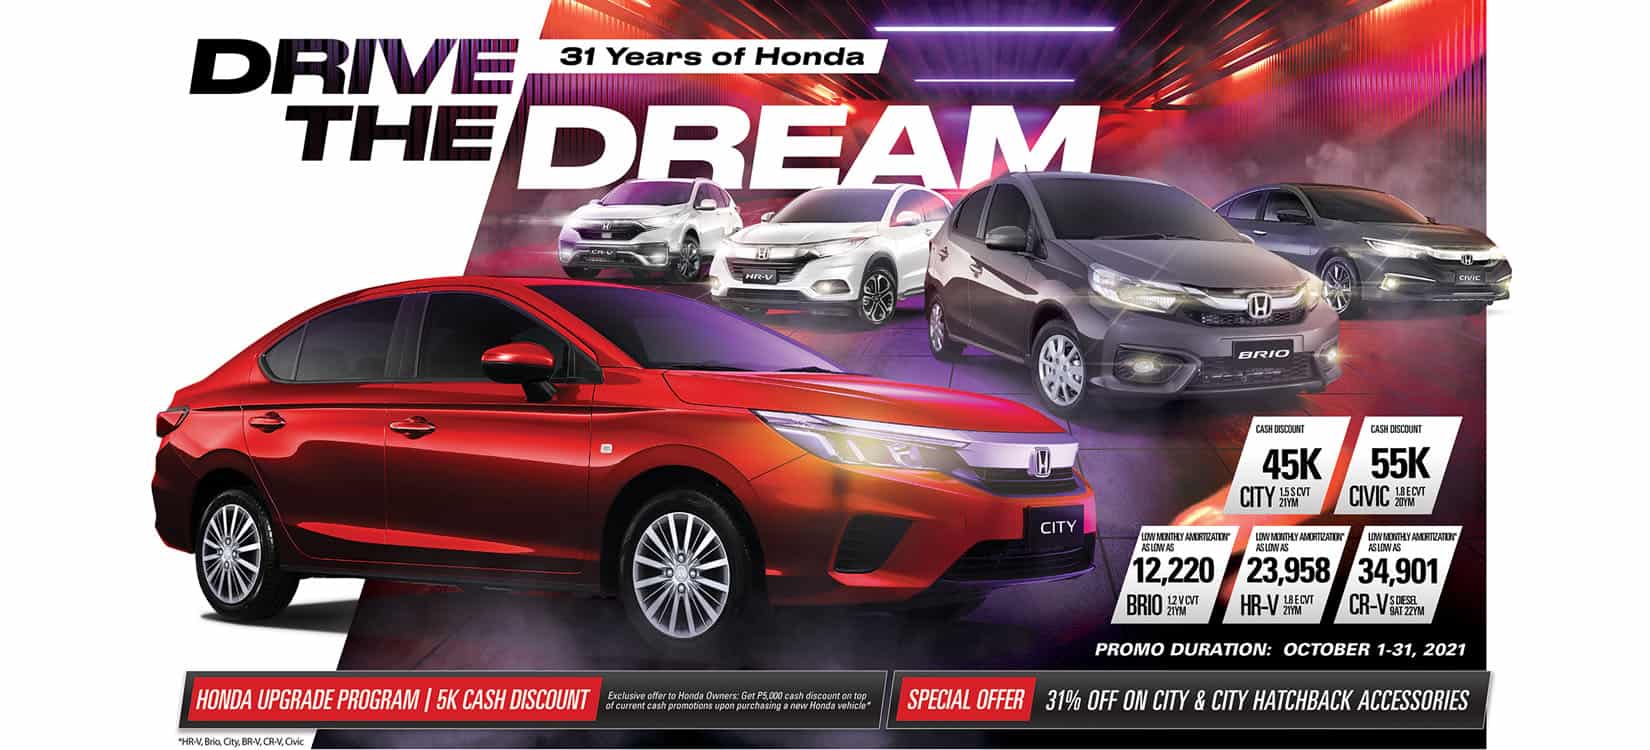 Honda celebrates its 31st anniversary with “Drive the Dream” promo this October